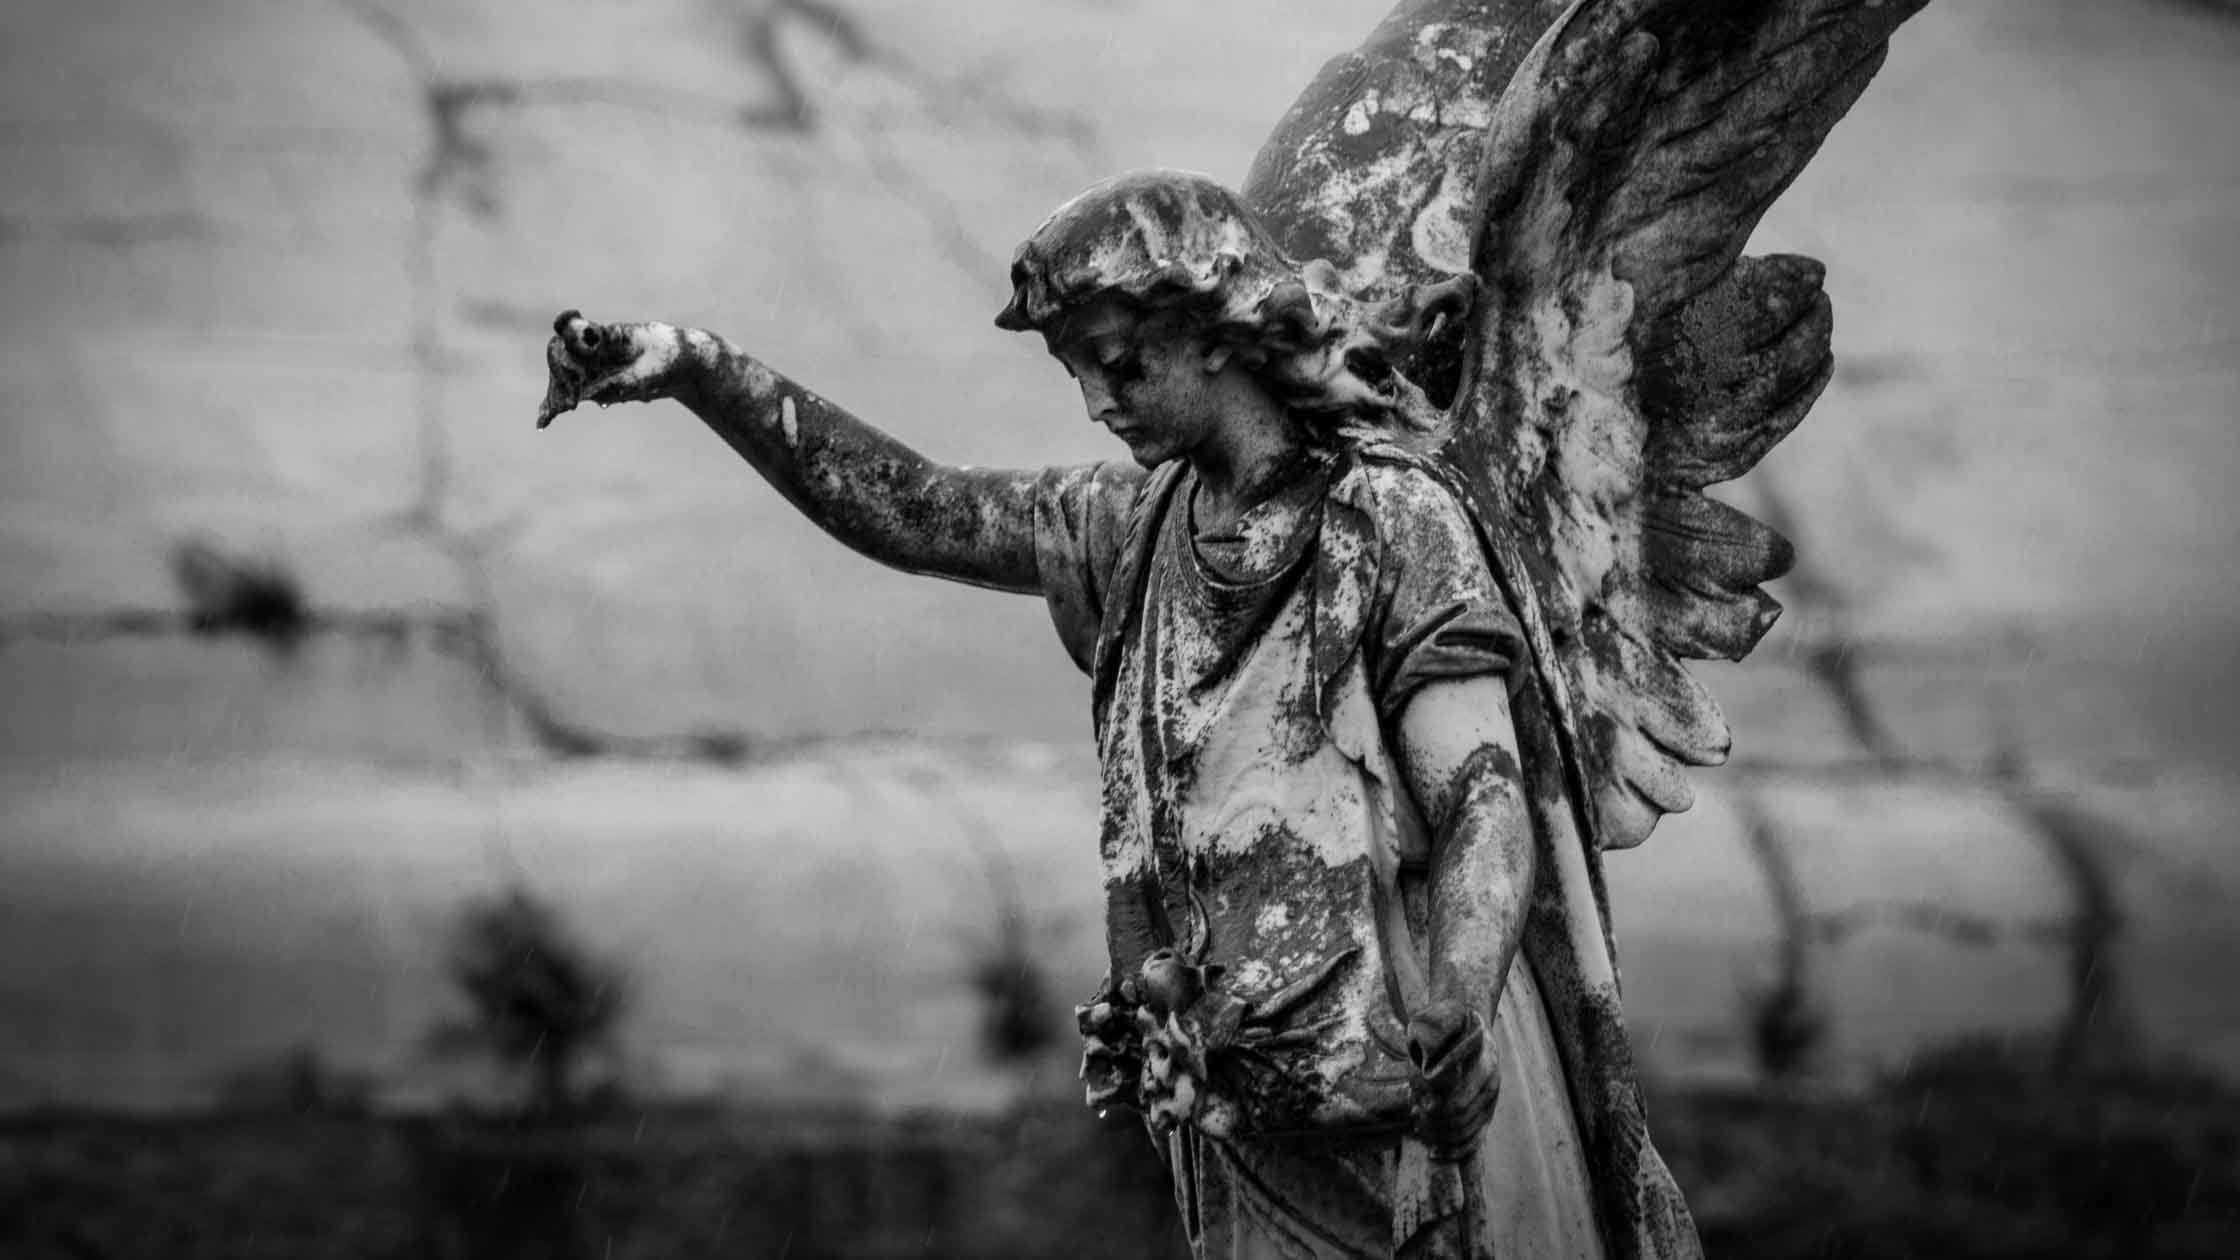 A black and white angel statue.